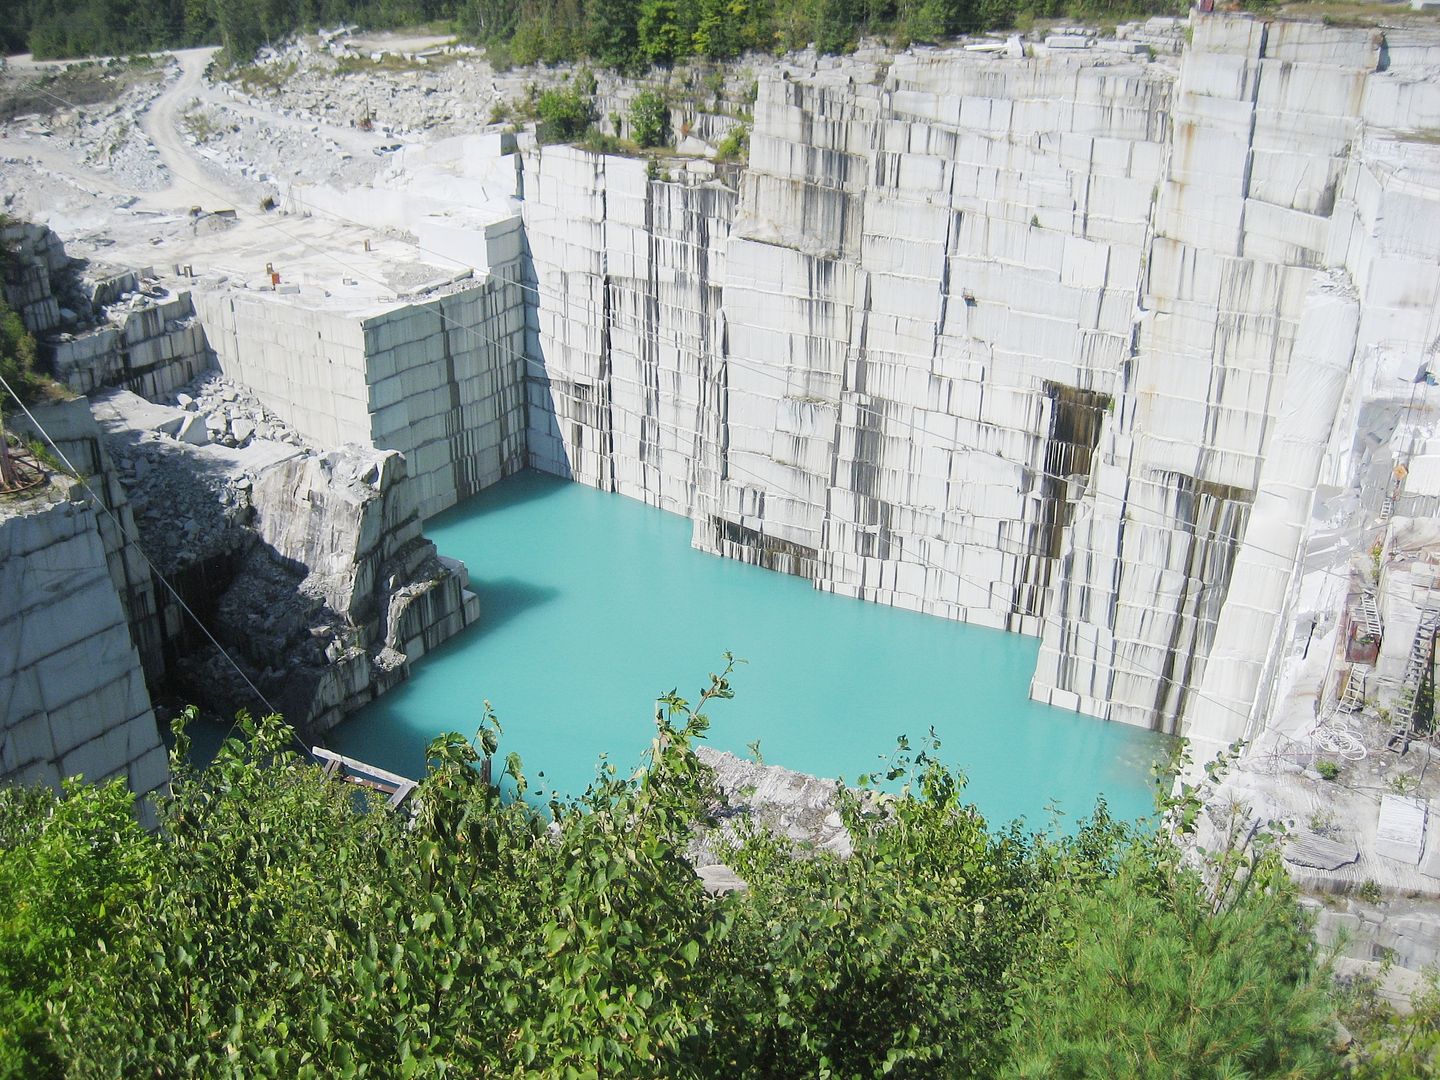 While in Vermont, we drove up to Graniteville to visit the Rock of Ages Quarry. That was great fun! 